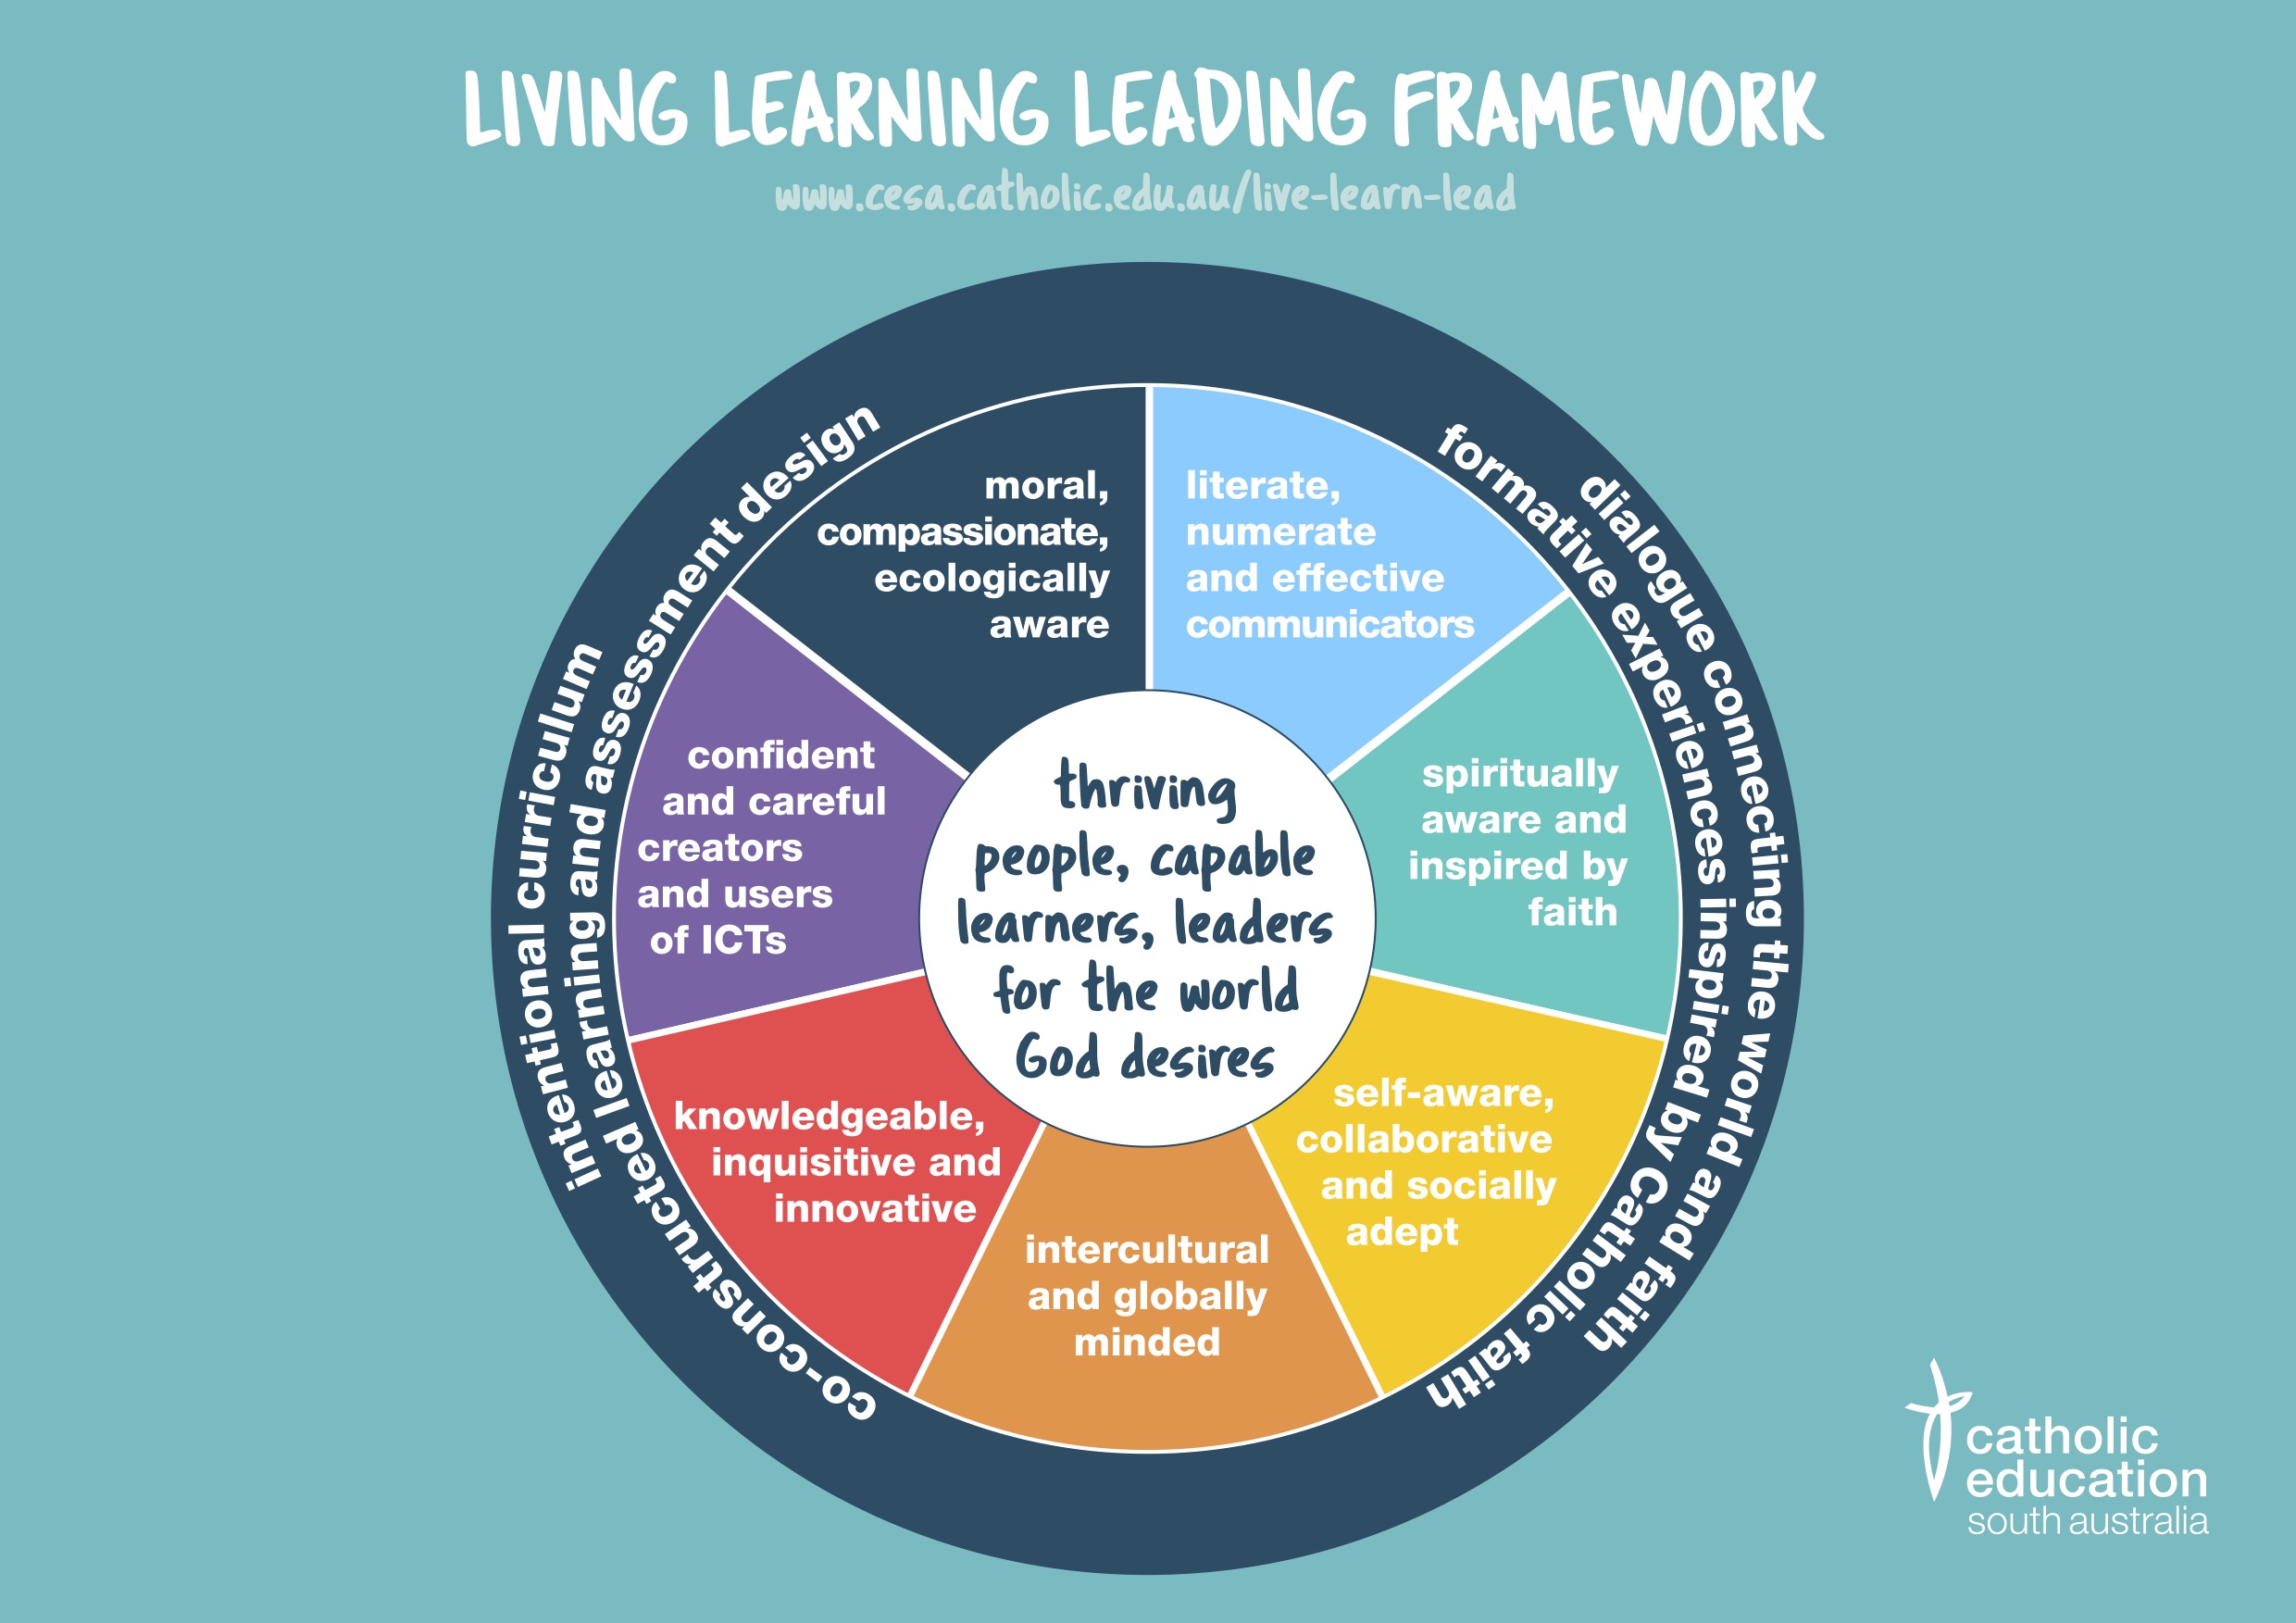 As a Catholic school in South Australia, the "Living, Learning, Leading" Framework is at the foundation of student's life at St Joseph's School, Kingswood.